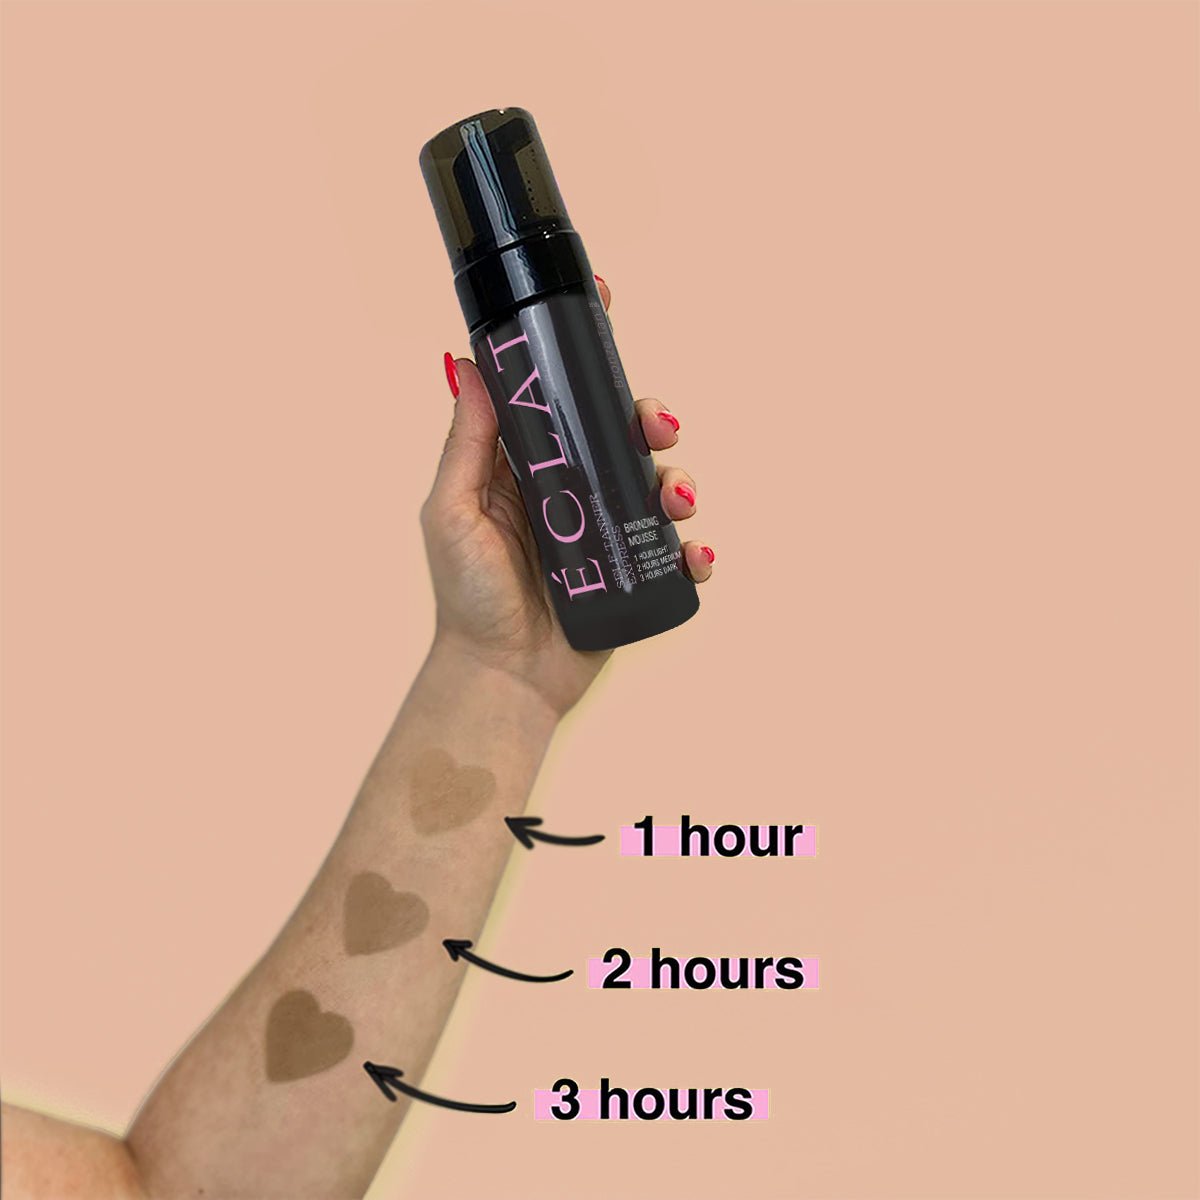 ECLAT SELF TANNING MOUSSE Self Tanning Mousse BY ECLAT BODY LAB for a Flawless Looking Tan – Achieve a Sext natural looking tan with our easy to apply, fast drying & lightweight tinted self tanning mousse. No self tan smell. Free shipping.